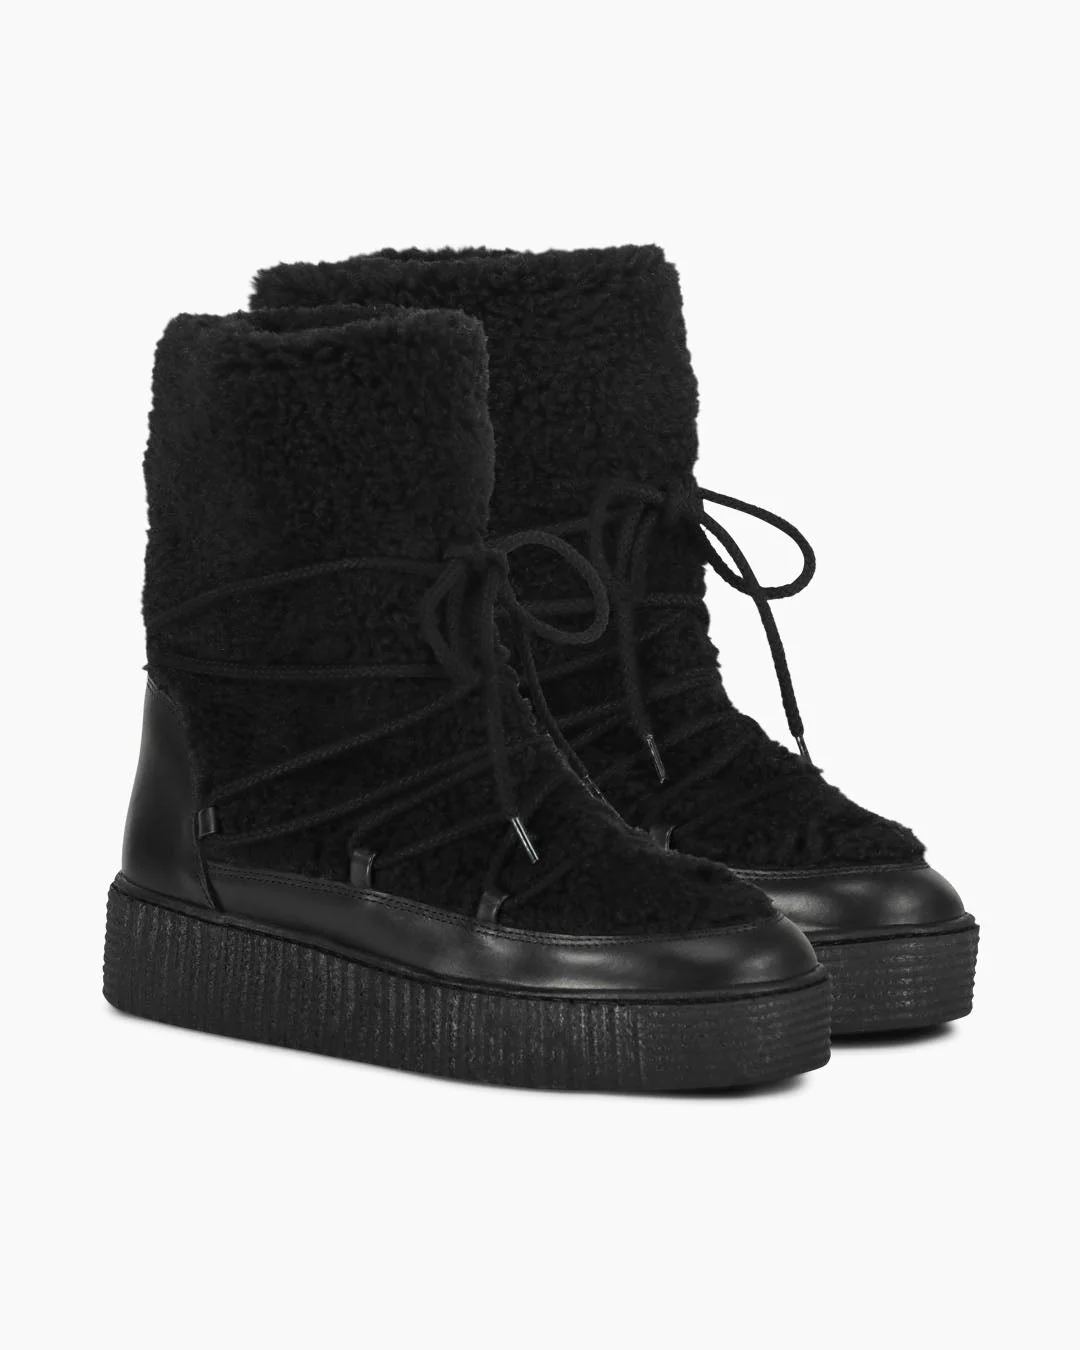 Another Label  HELLE TEDDY boot / women